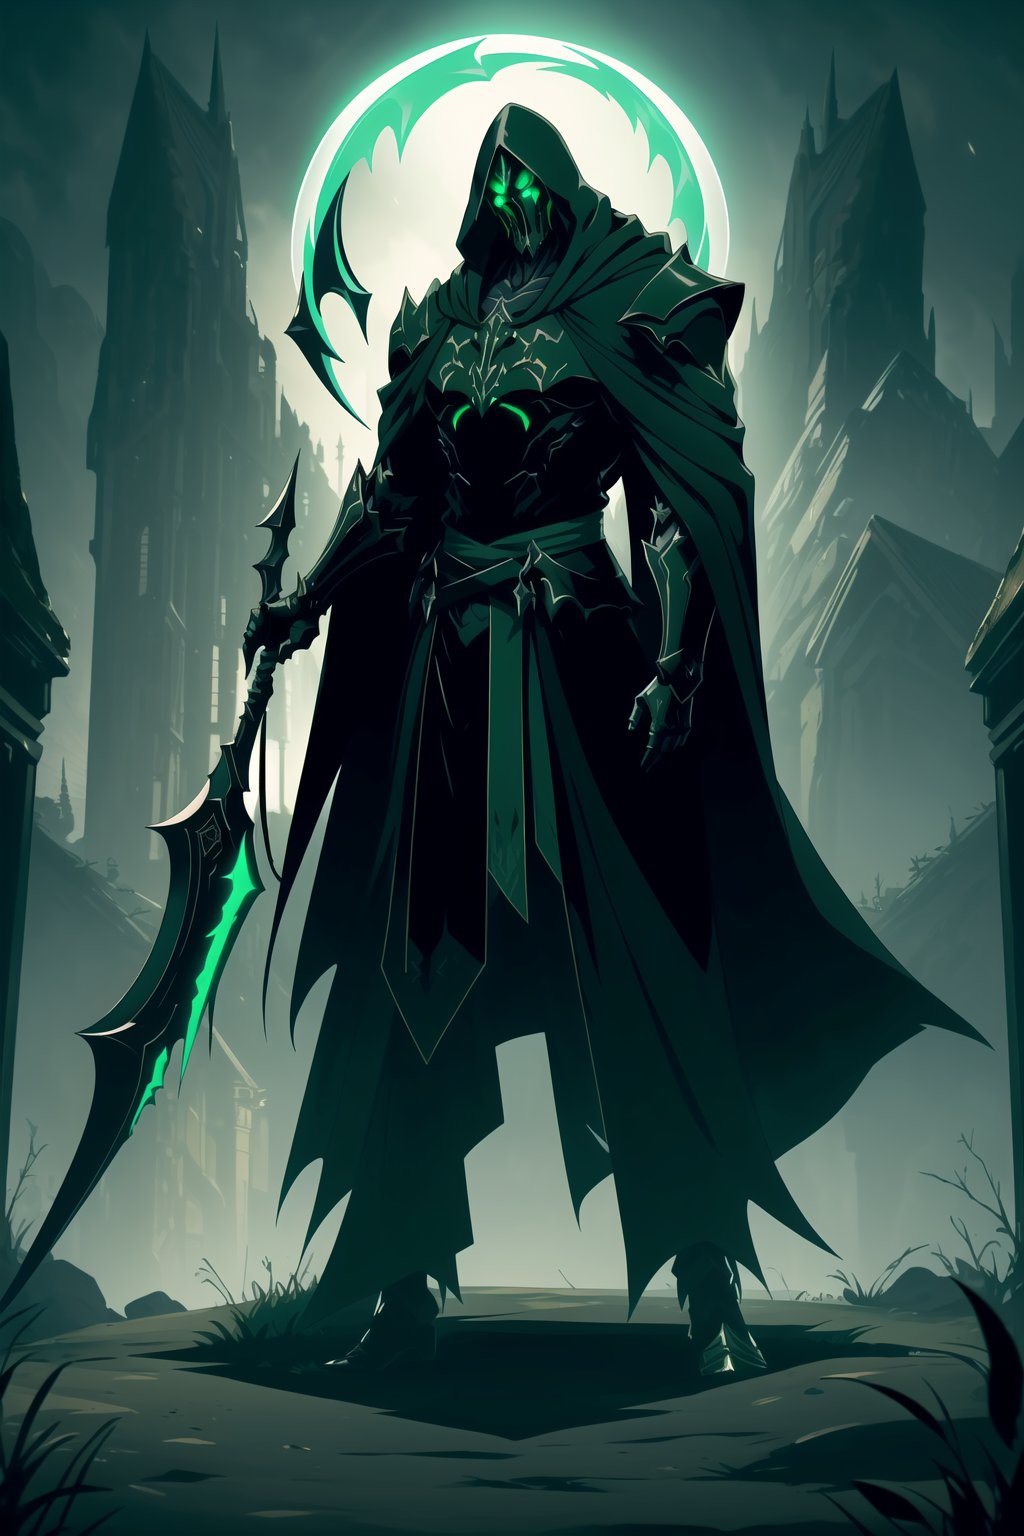 (Masterpiece, Best Quality), (Grim Reaper in Warframe Style Armor), (Masculine Appearance:1.4), (Muscular Frame Build:1.2), (Glowing Green Eyes), (Wearing Black and Green Grim Reaper-Themed Armored Robe and Black Flowing Cloak:1.4), (Wielding a Black Scythe:1.4), (Foggy Cemetery at Night:1.2), (Action Pose:1.4), Centered, (Full Body Shot:1.2), (From Front Shot:1.2), Insane Details, Intricate Face Detail, Intricate Hand Details, Cinematic Shot and Lighting, Realistic and Vibrant Colors, Sharp Focus, Ultra Detailed, Realistic Images, Depth of Field, Incredibly Realistic Environment and Scene, Master Composition and Cinematography, castlevania style,castlevania style,WARFRAME